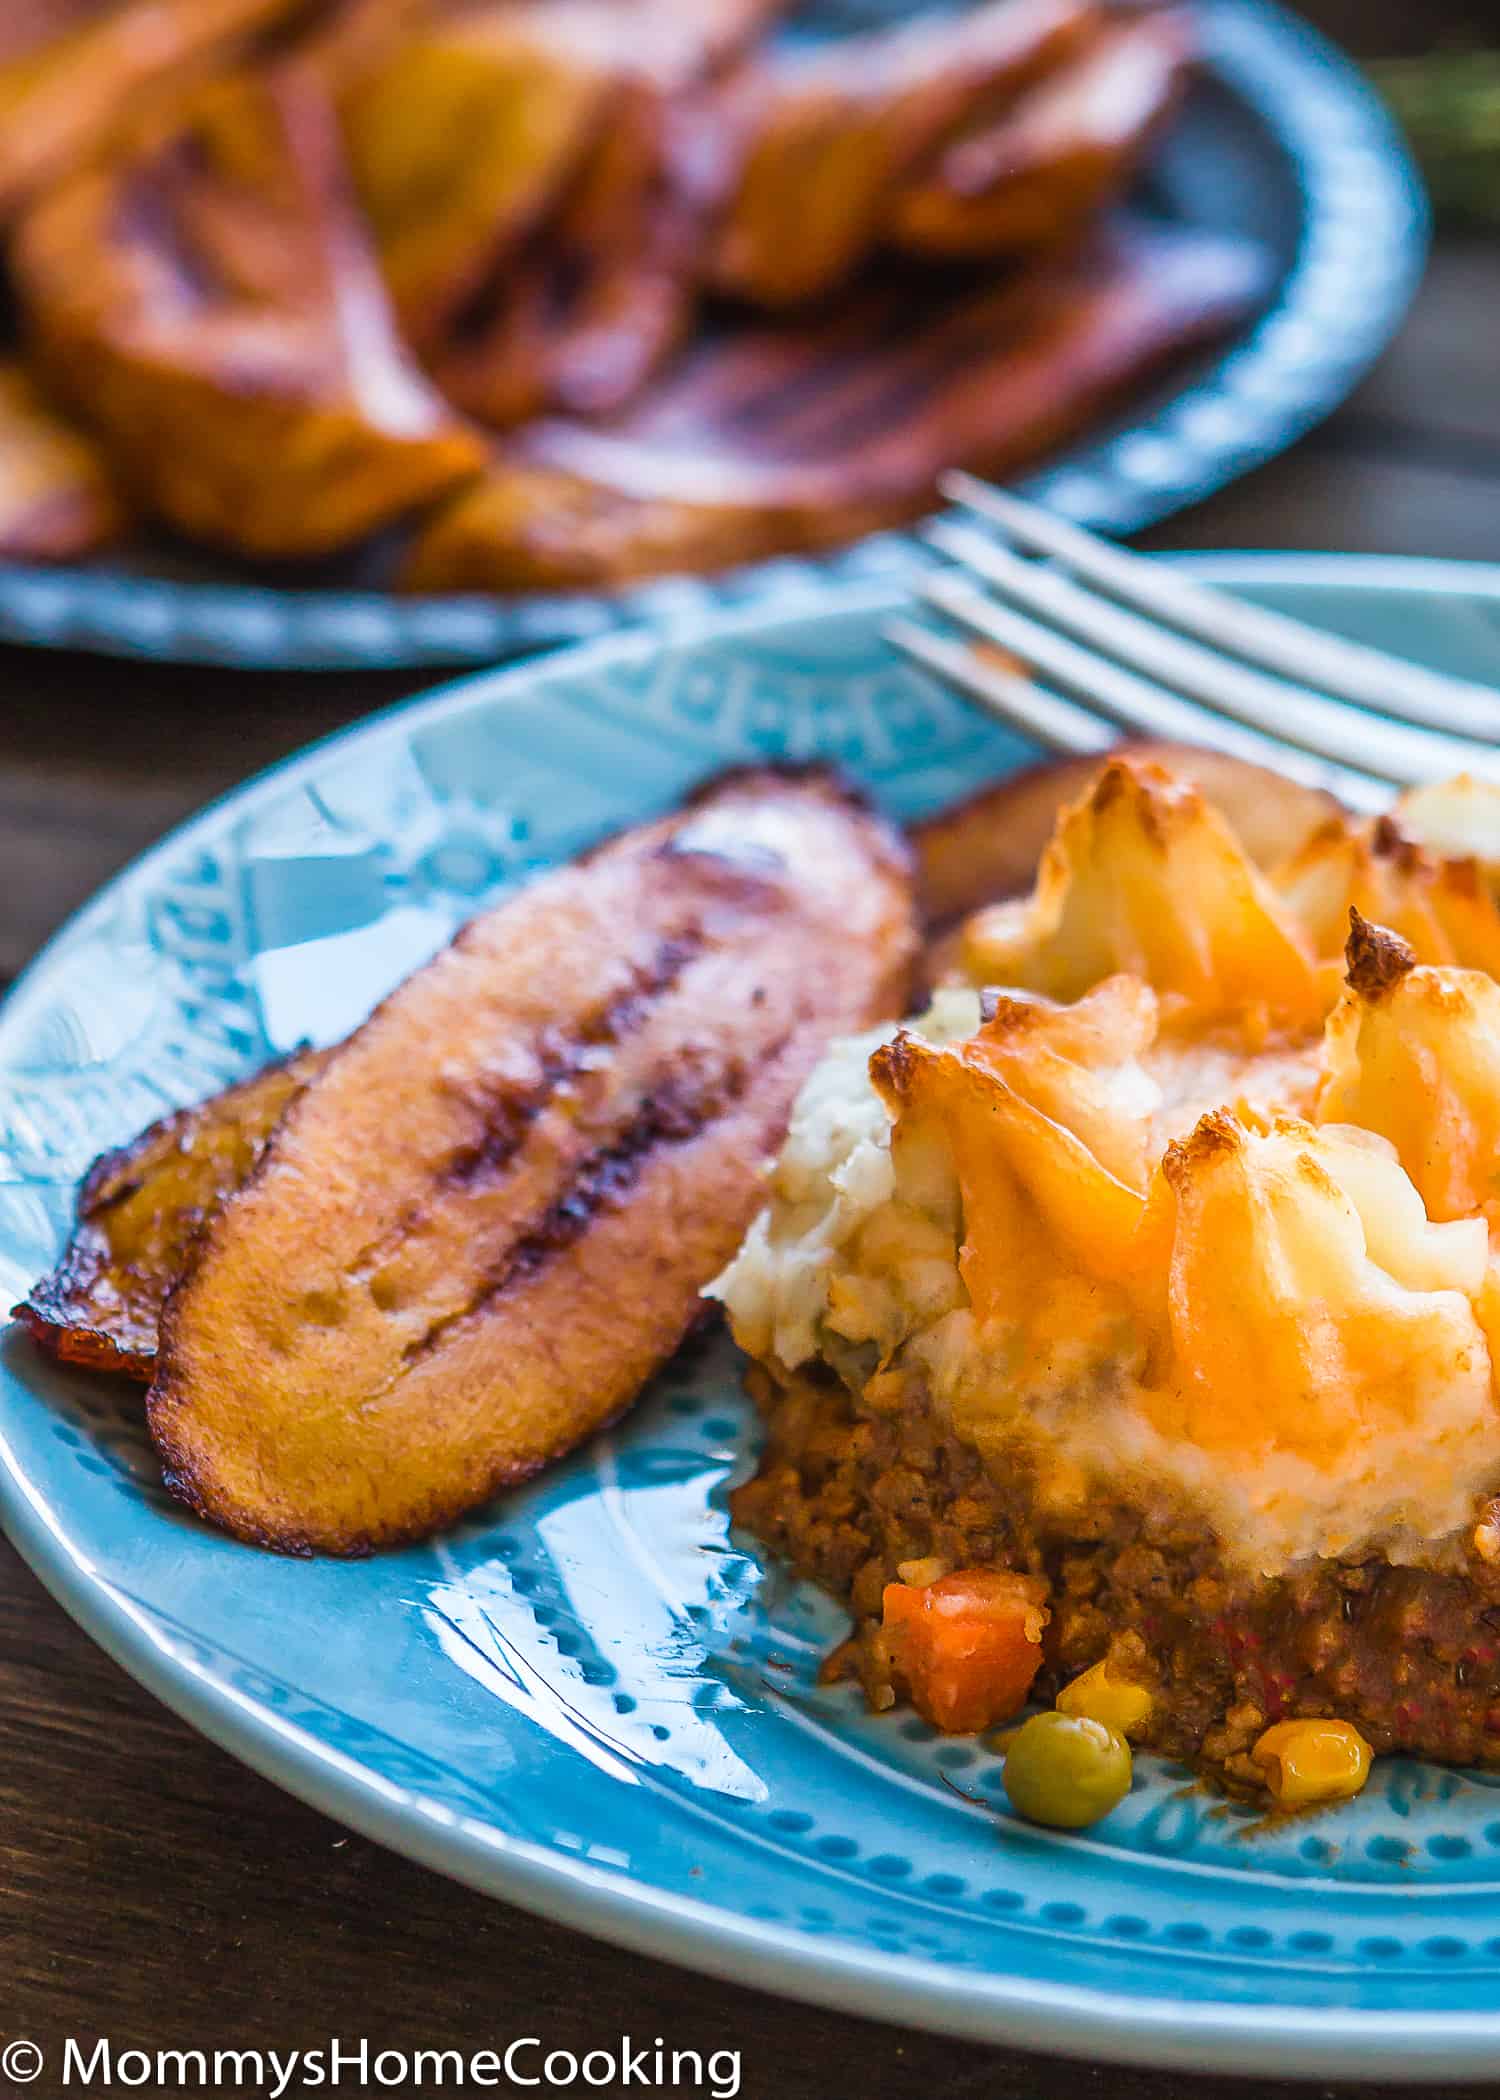 This Easy Shepherd's Pie recipe is a complete, comforting, and scrumptious meal full of flavor! Made from scratch with Parmesan mashed potatoes and baked to perfection. https://mommyshomecooking.com